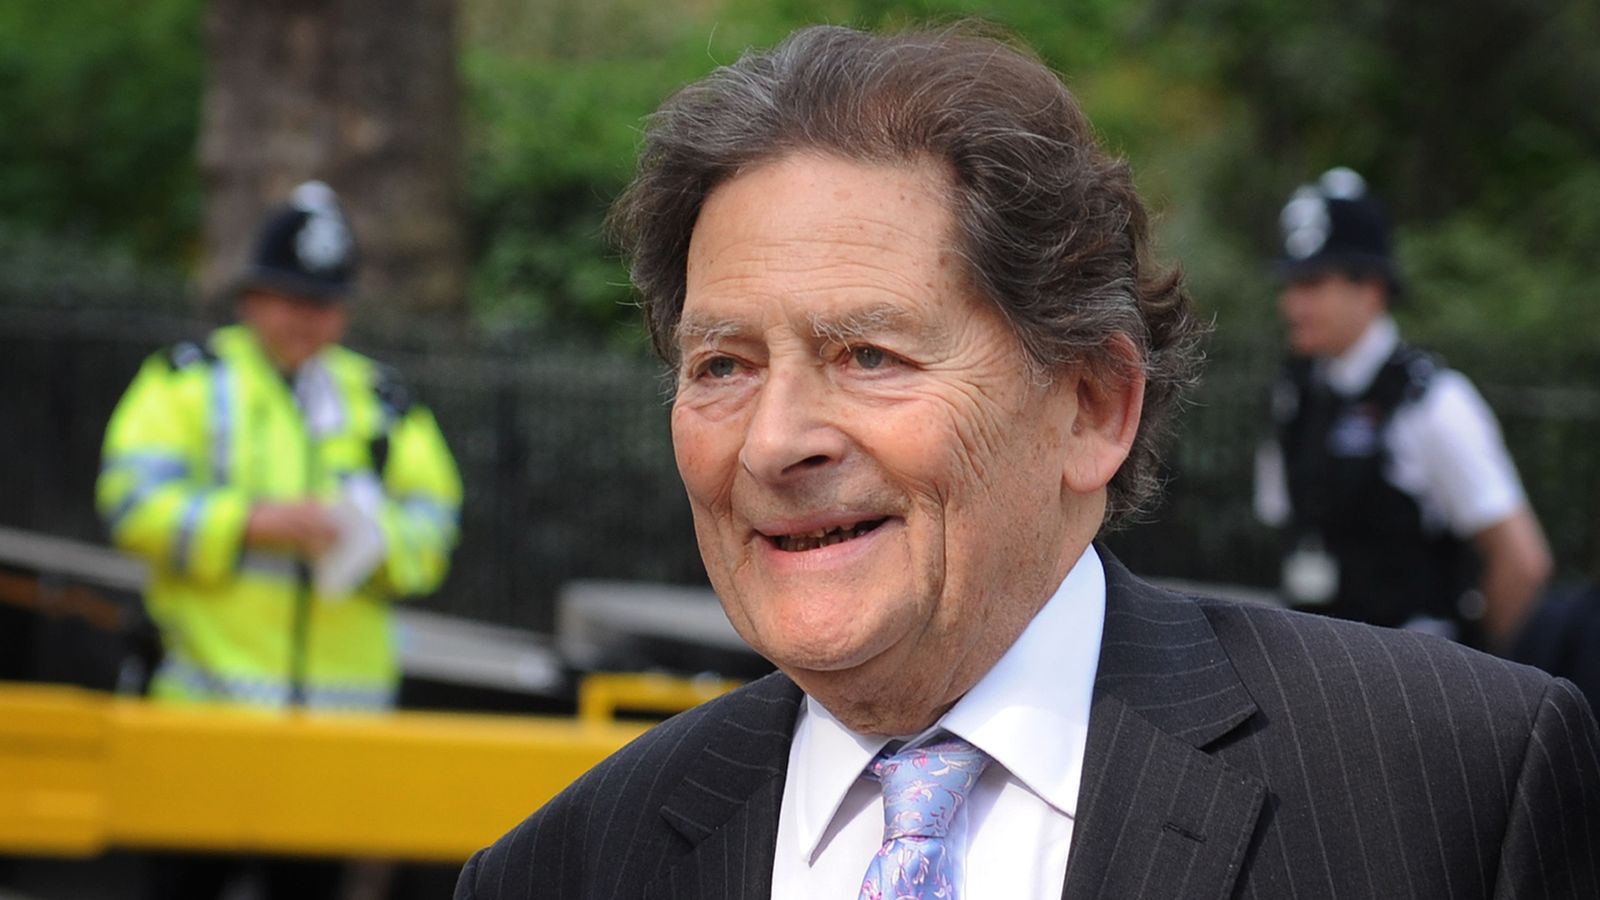 Nigel Lawson: Tributes paid to 'giant' of politics after former chancellor's death aged 91